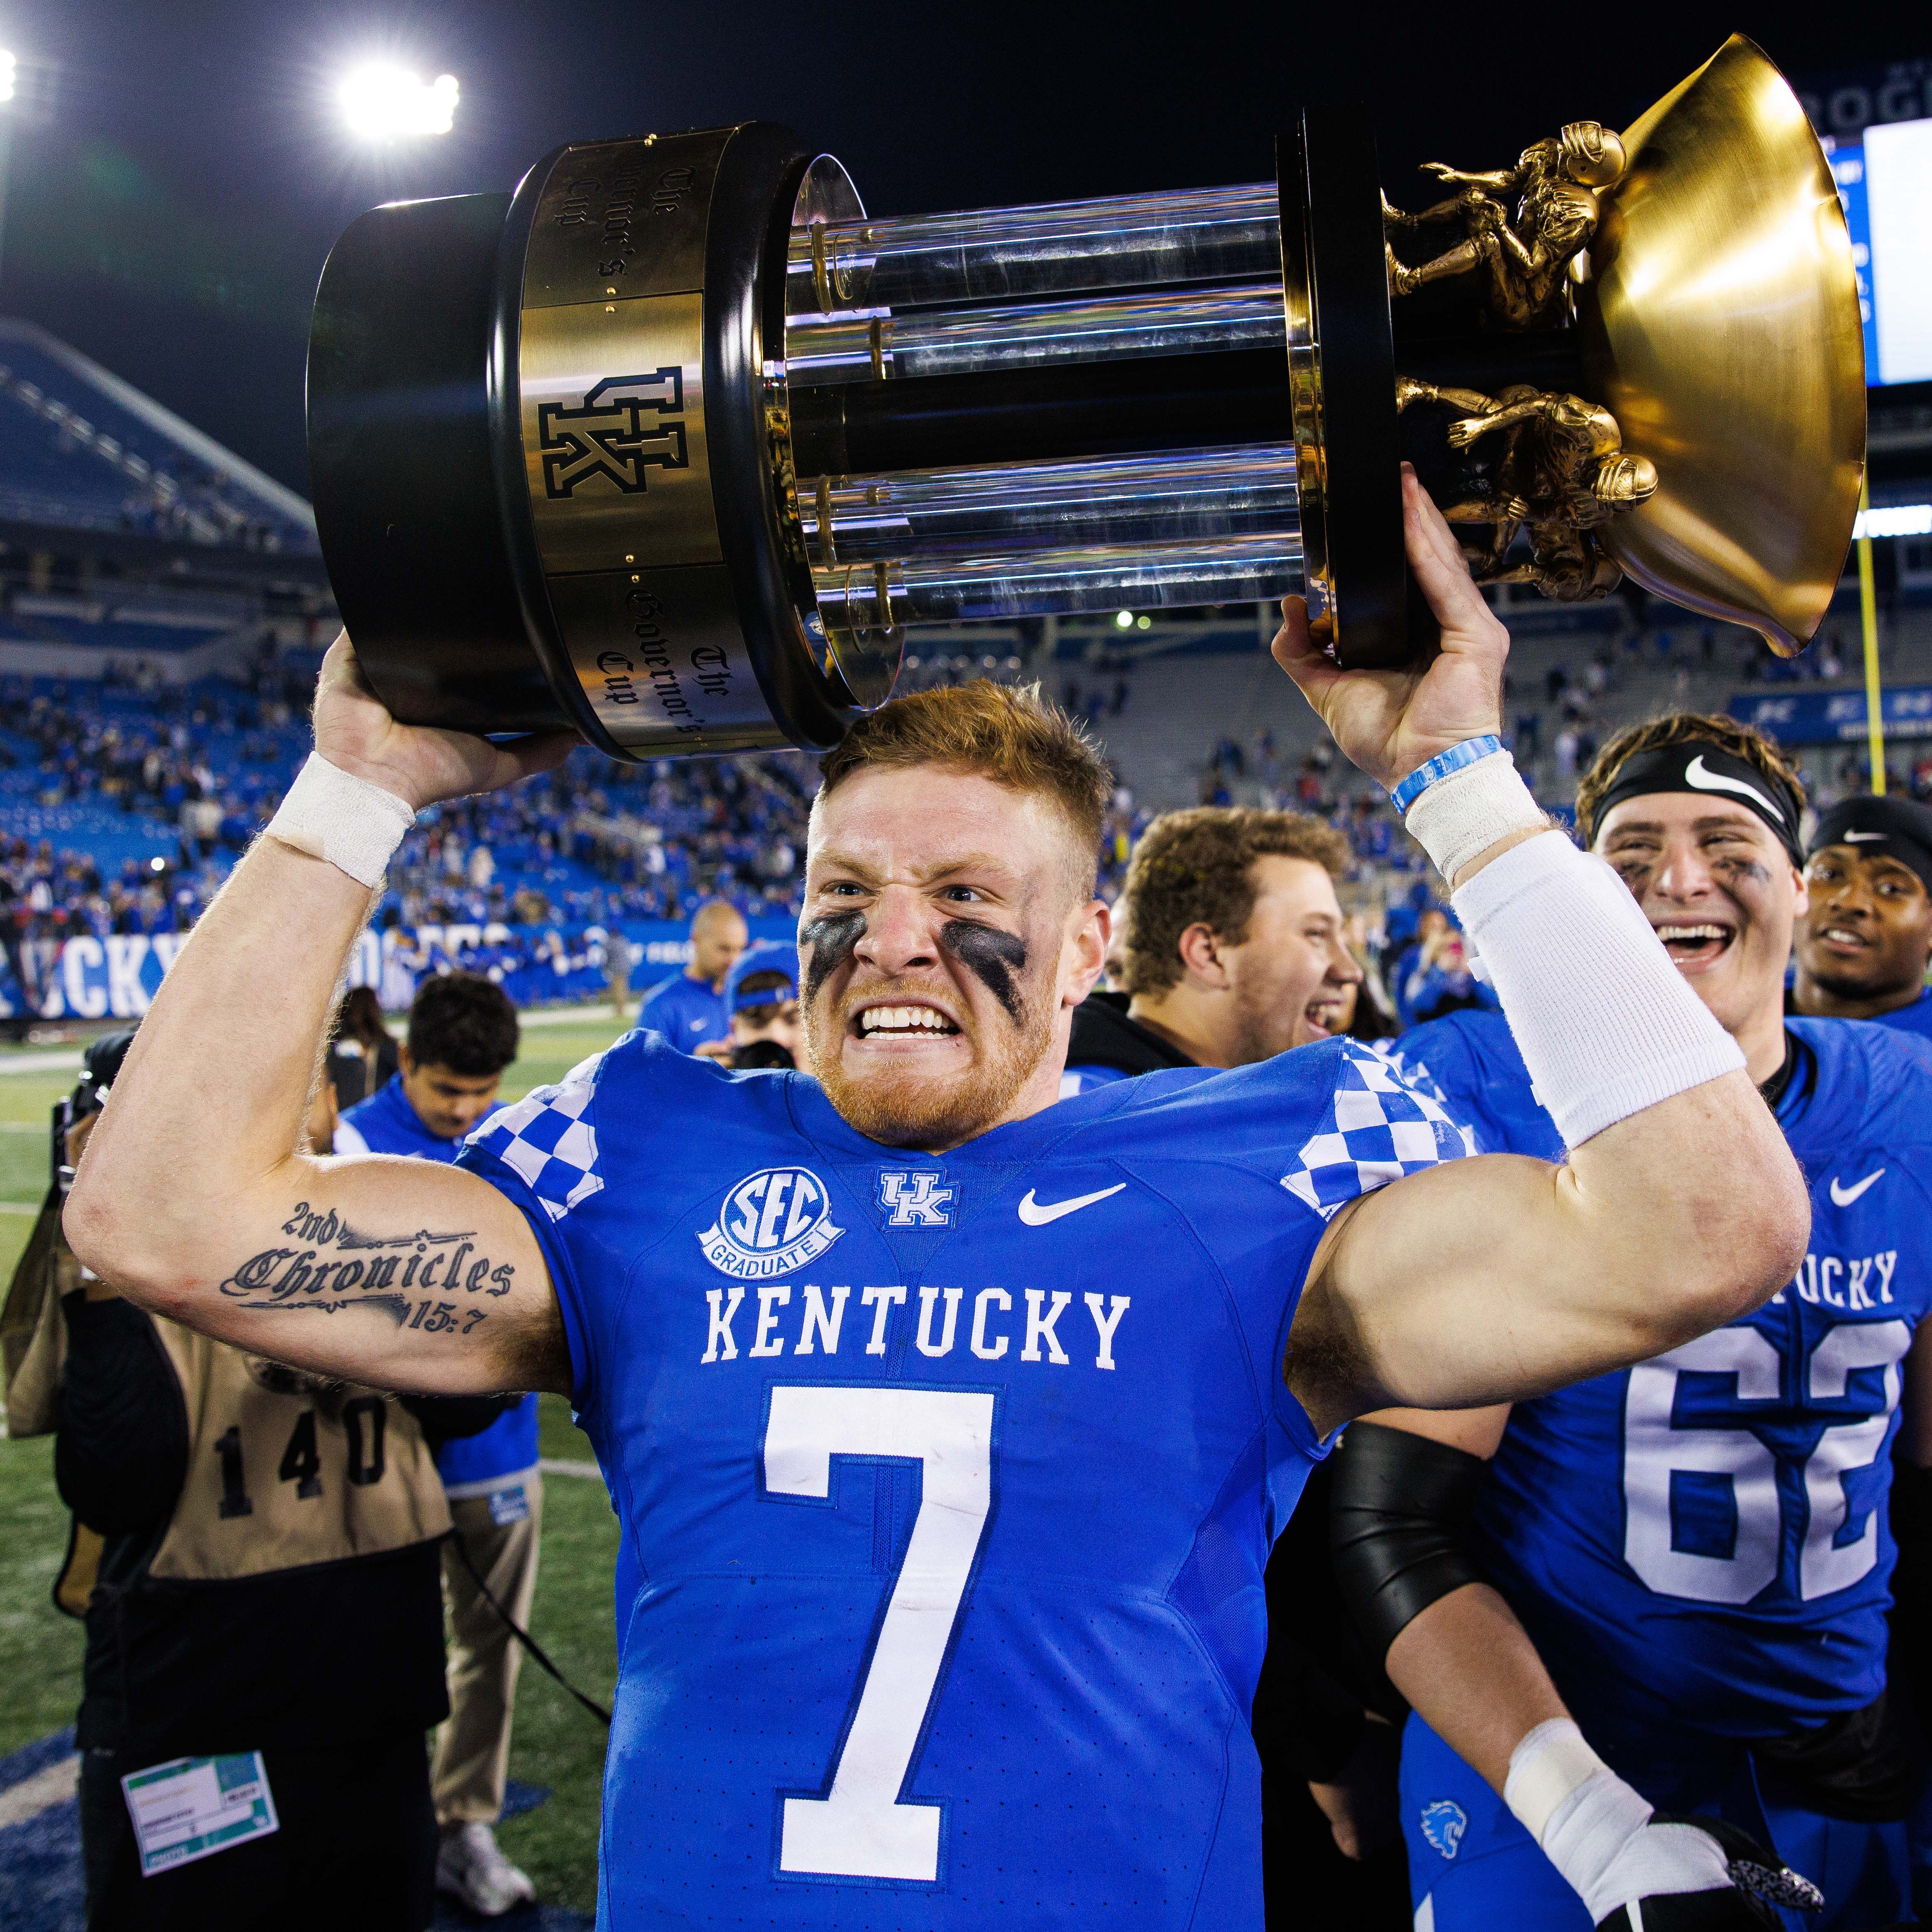 Kentucky Wildcats quarterback Will Levis (7) holds up the Governor's Cup trophy after winning the game against the Louisville Cardinals at Kroger Field.